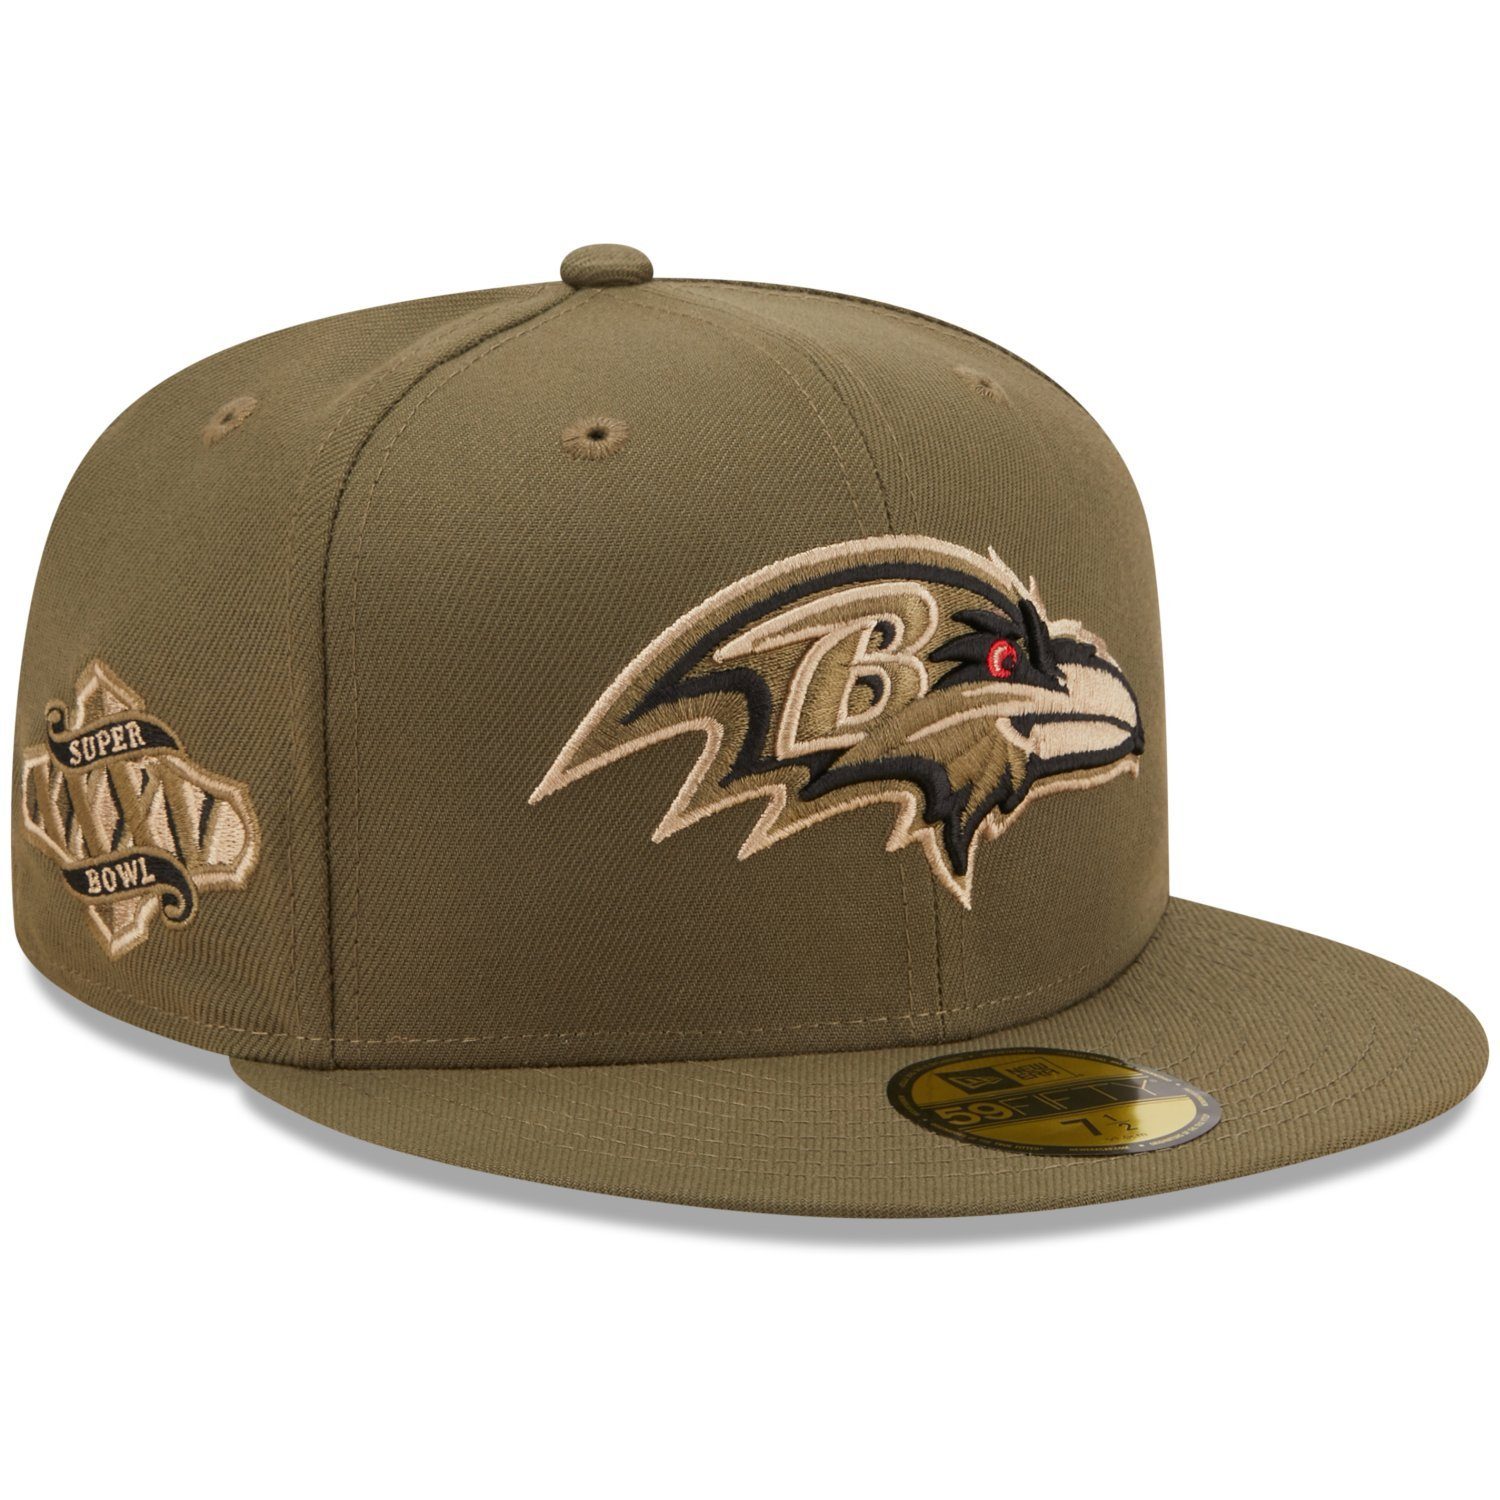 New Era Fitted Cap 59Fifty NFL Throwback Superbowl ProBowl Baltimore Ravens